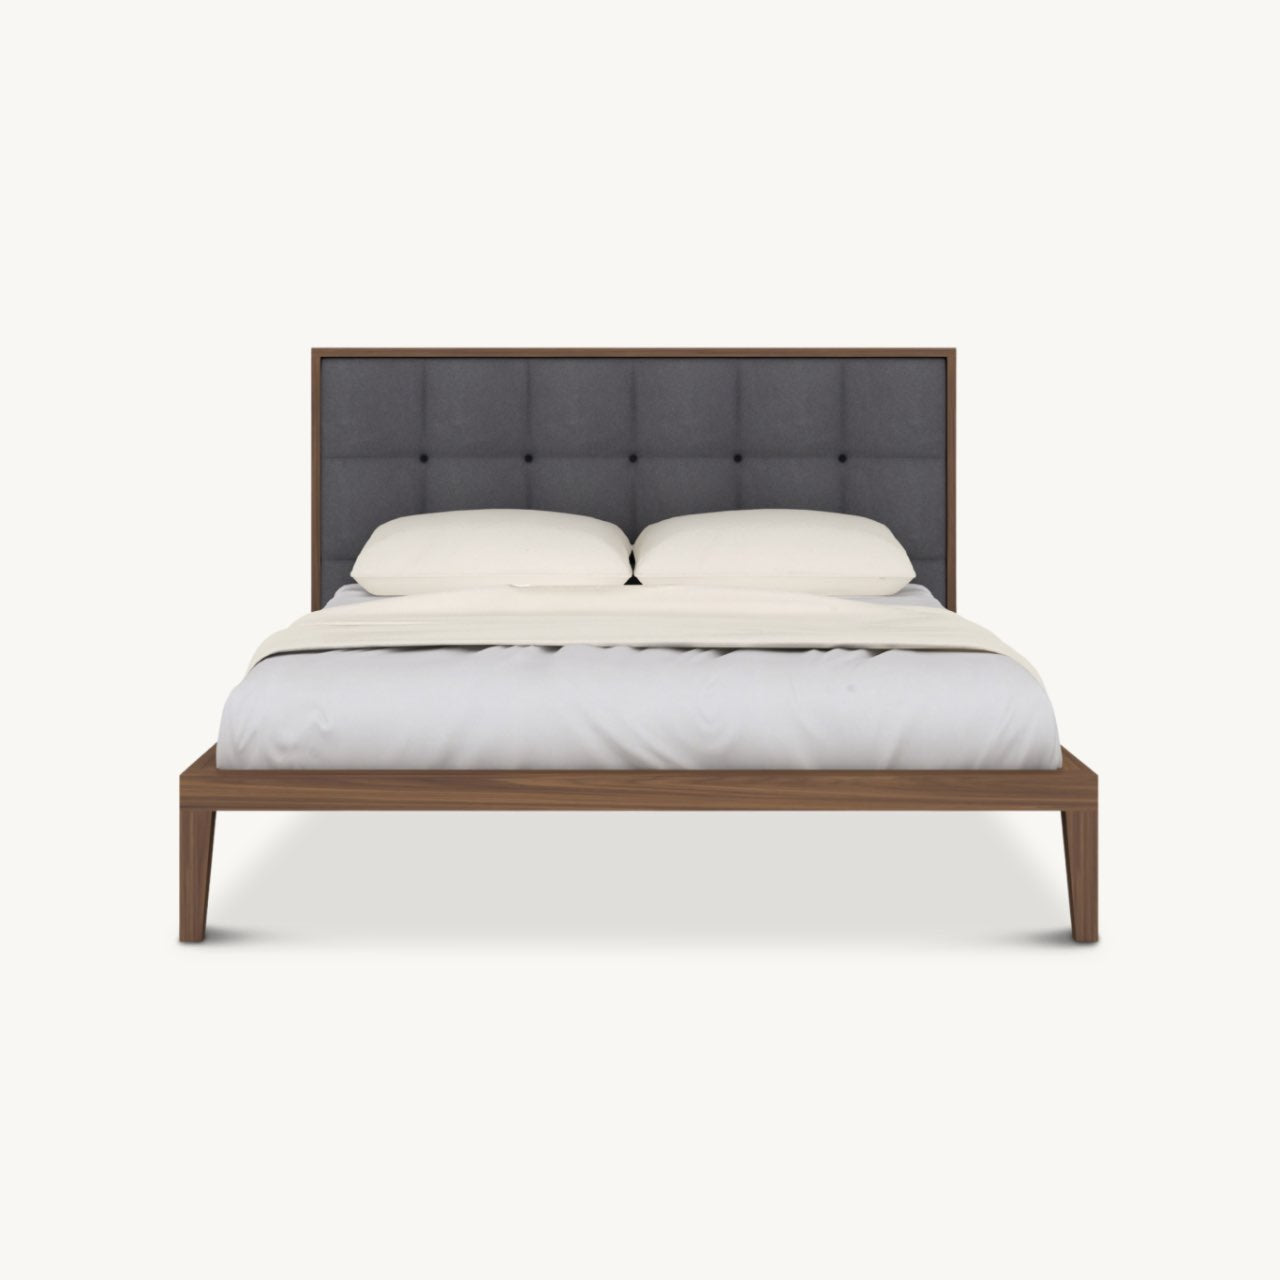 Calla Beds in Walnut and Natural Grey - Living In Kin